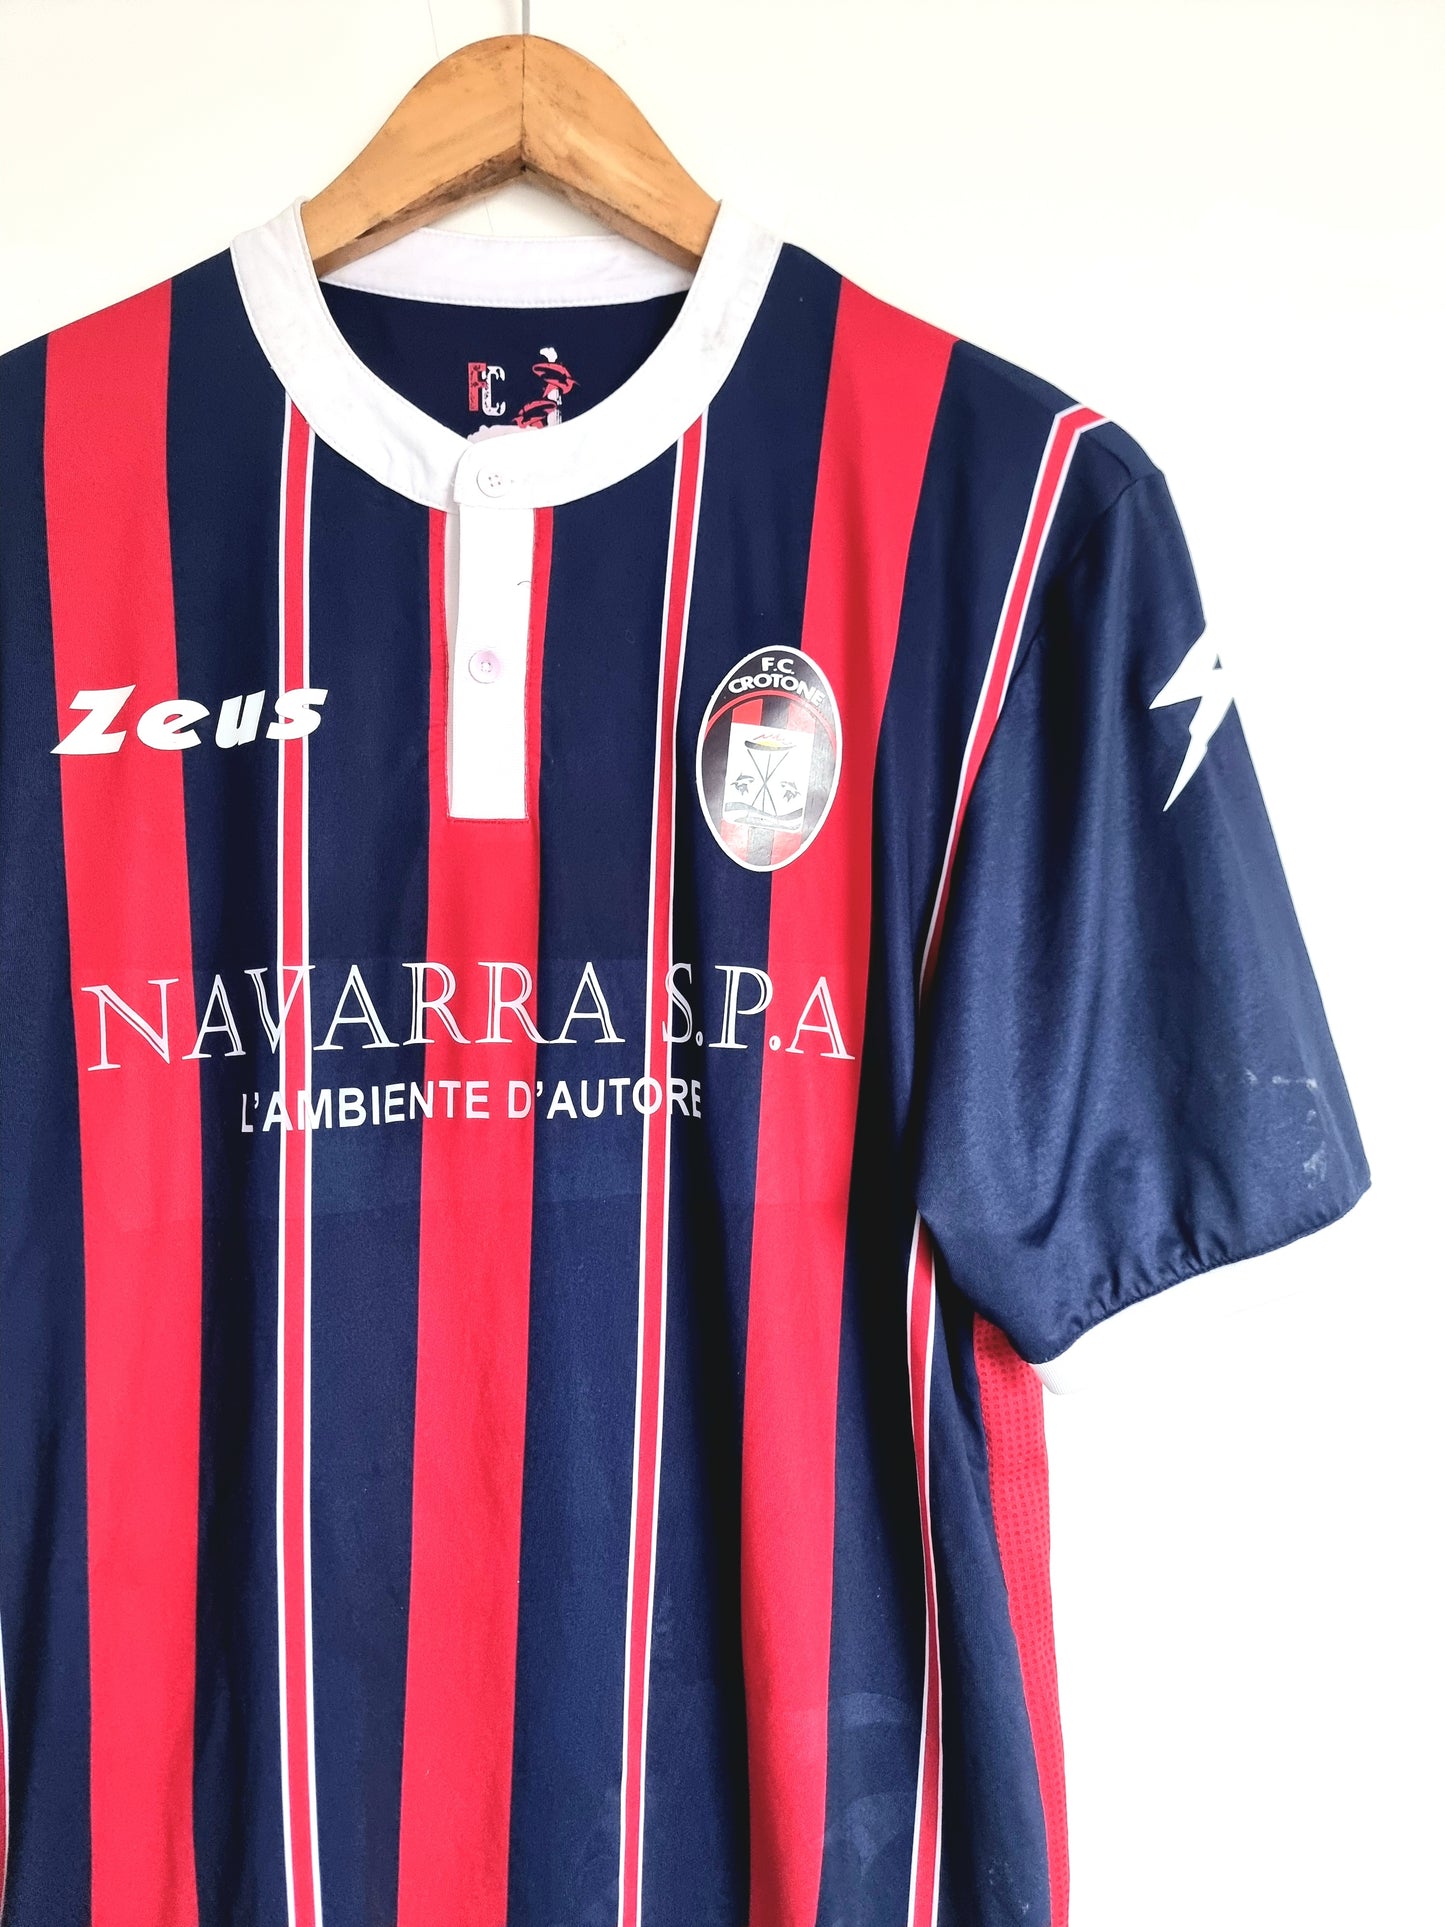 Zeus FC Crotone 16/17 'Trotta 29' Match Issue Home Shirt Large